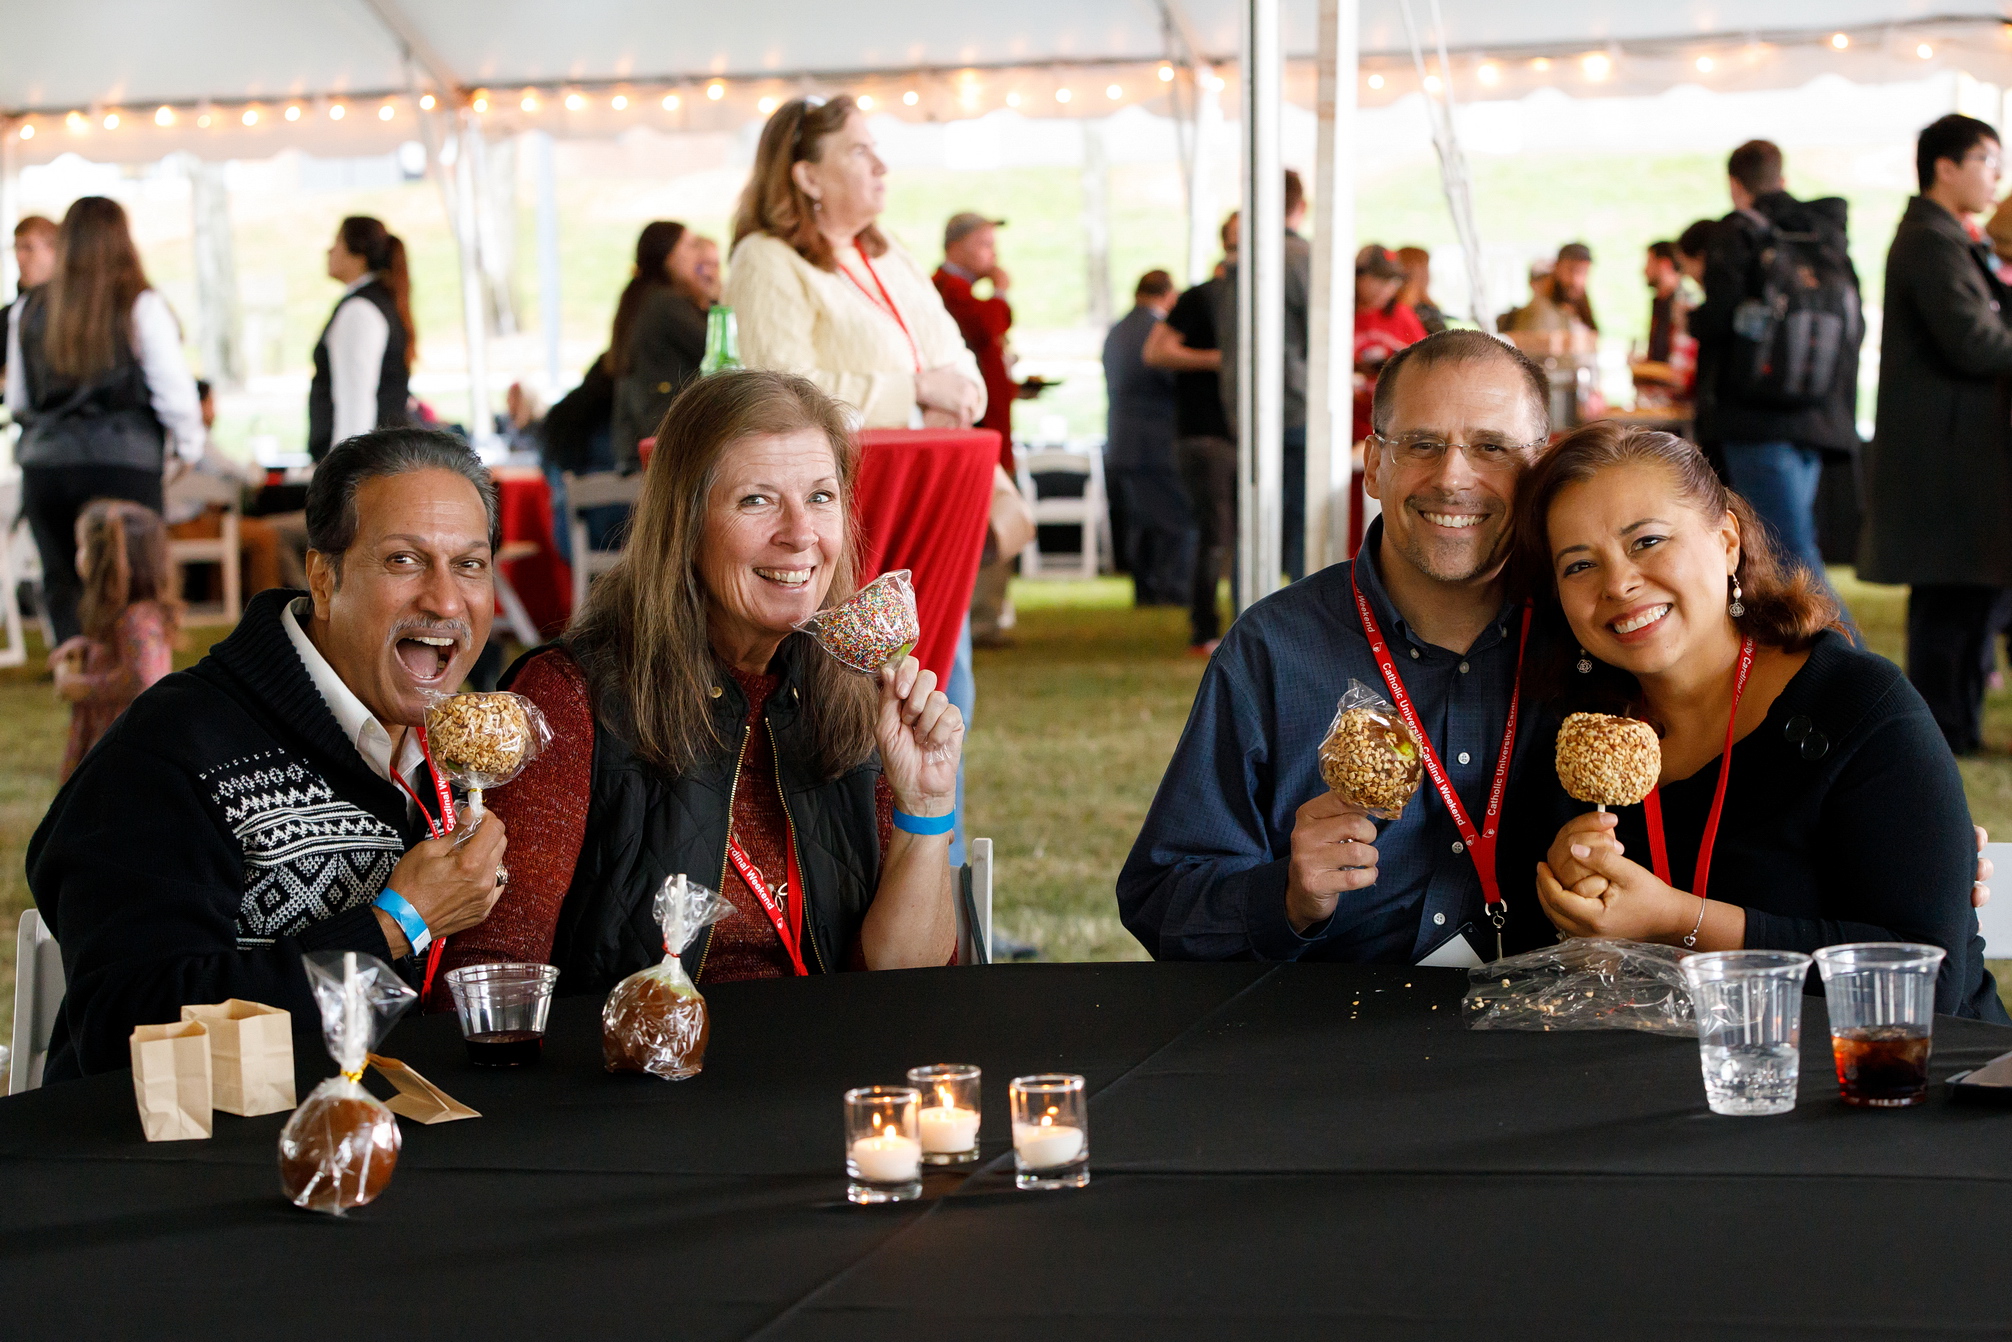 Alumni smiling with candy apples